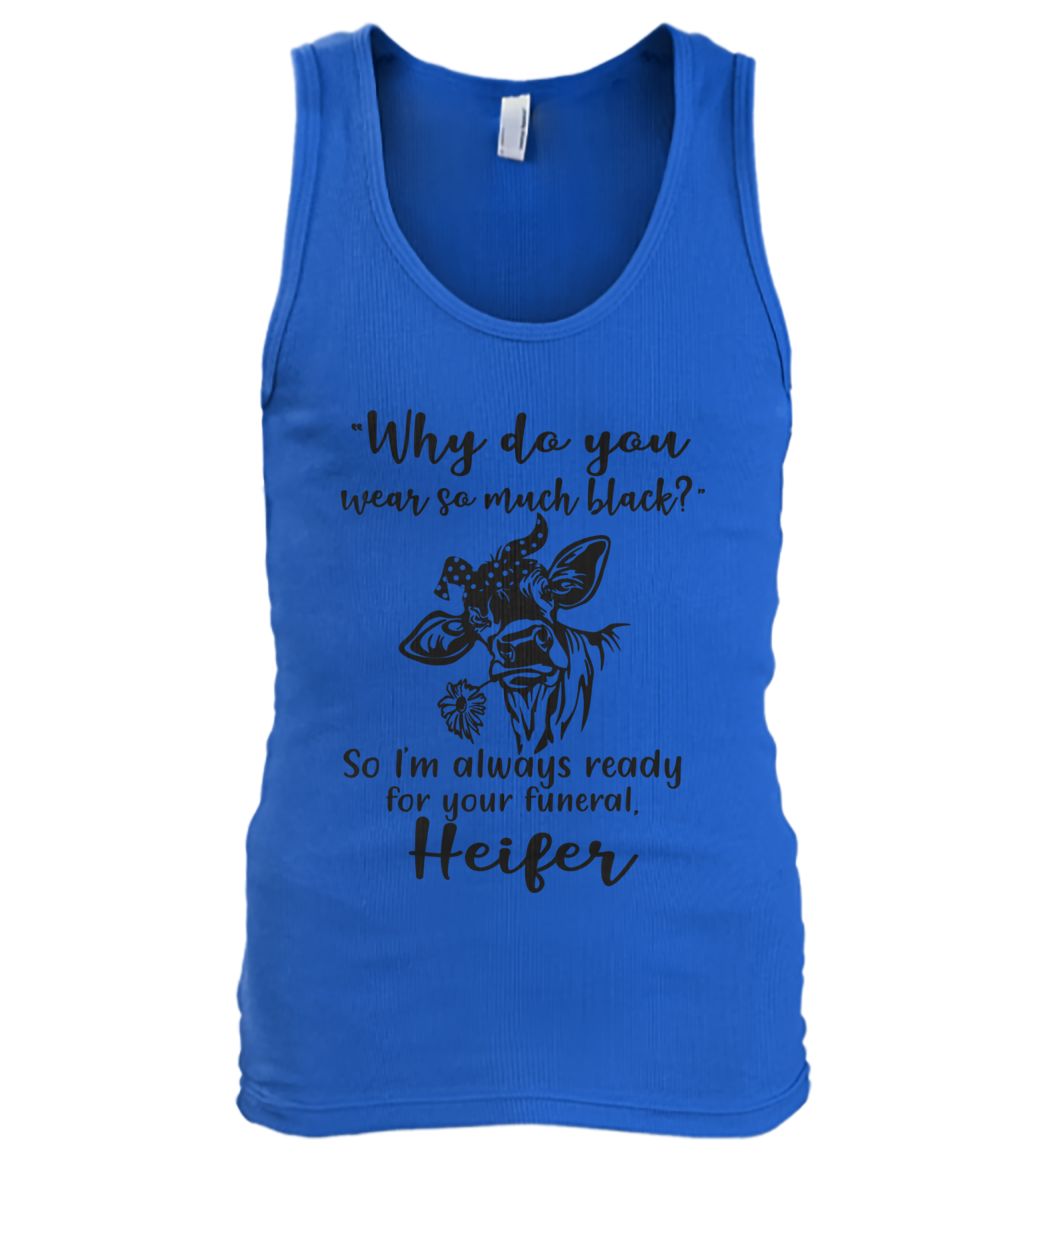 Heifer why do you wear so much black so i'm always ready for your funeral men's tank top